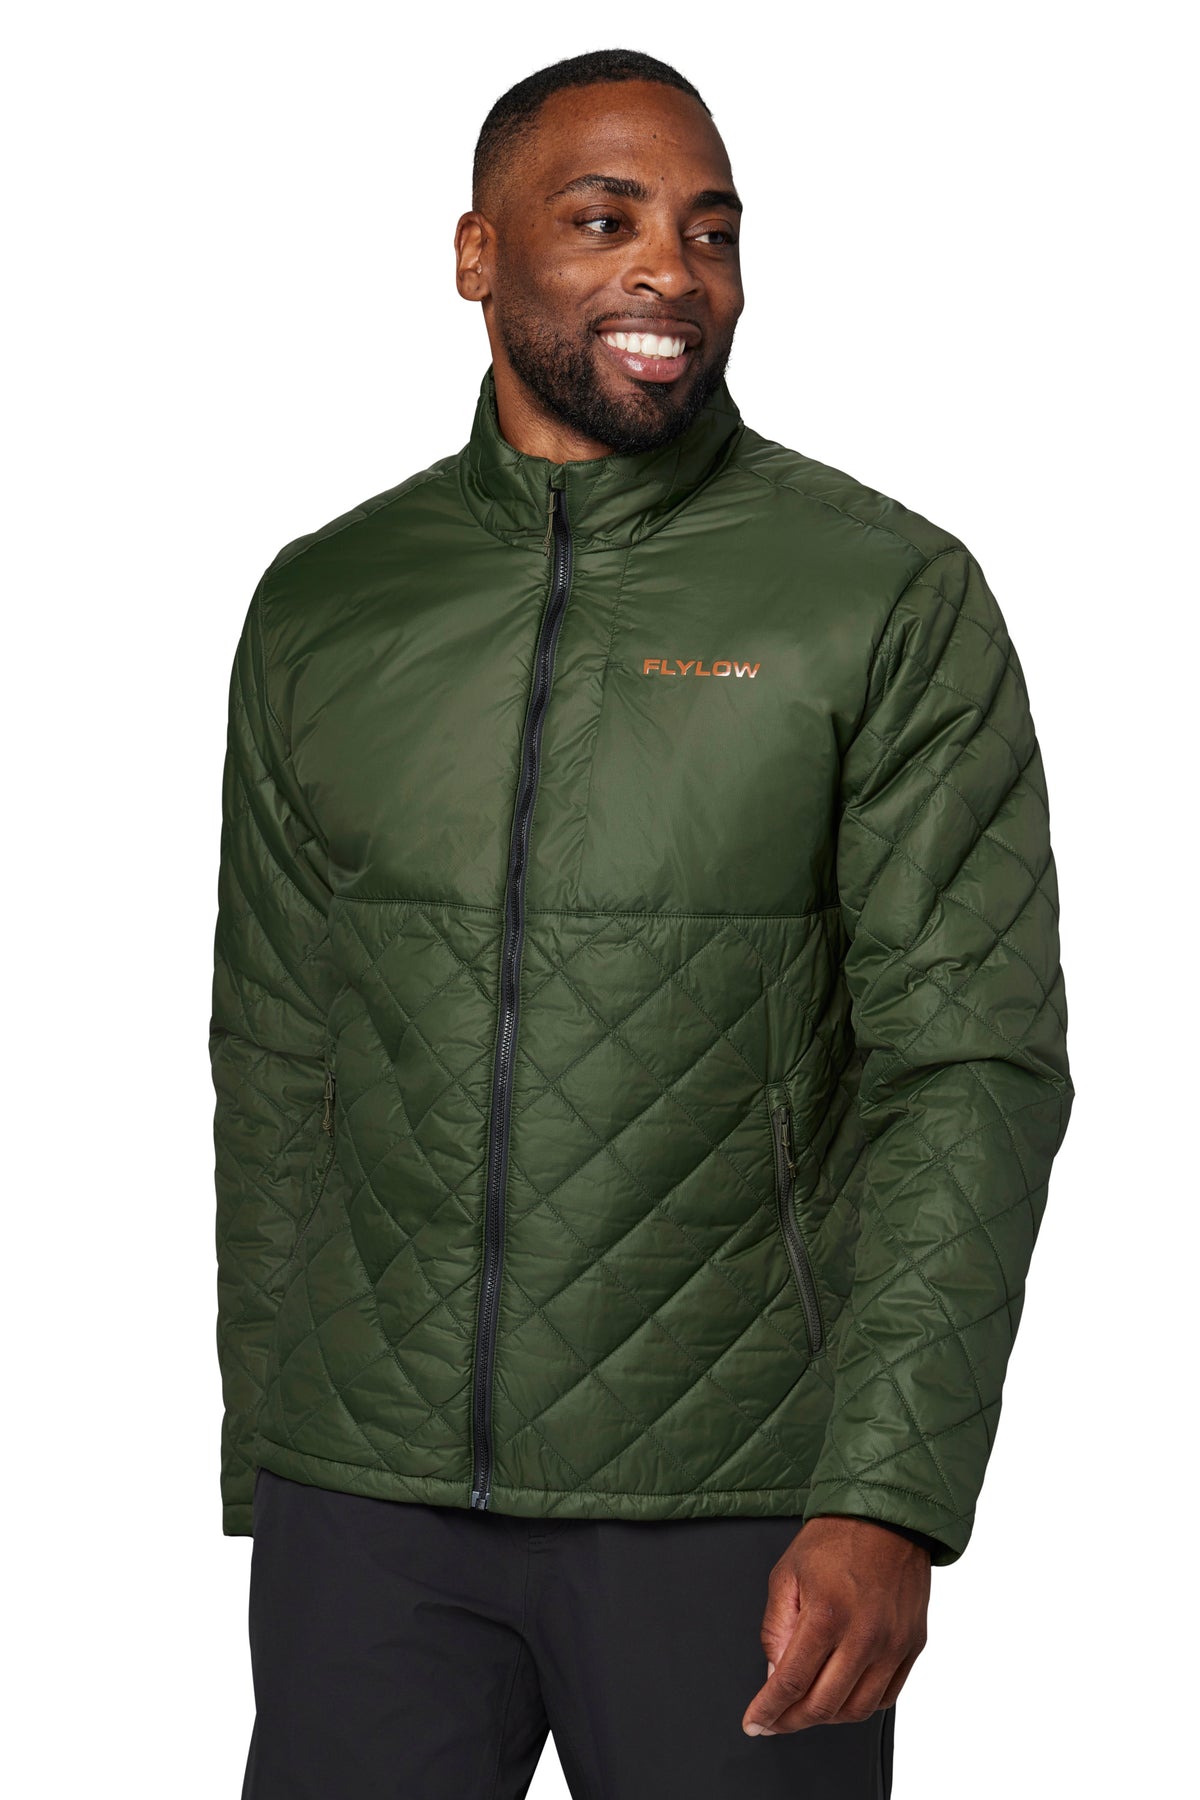 flylow insulated jacket